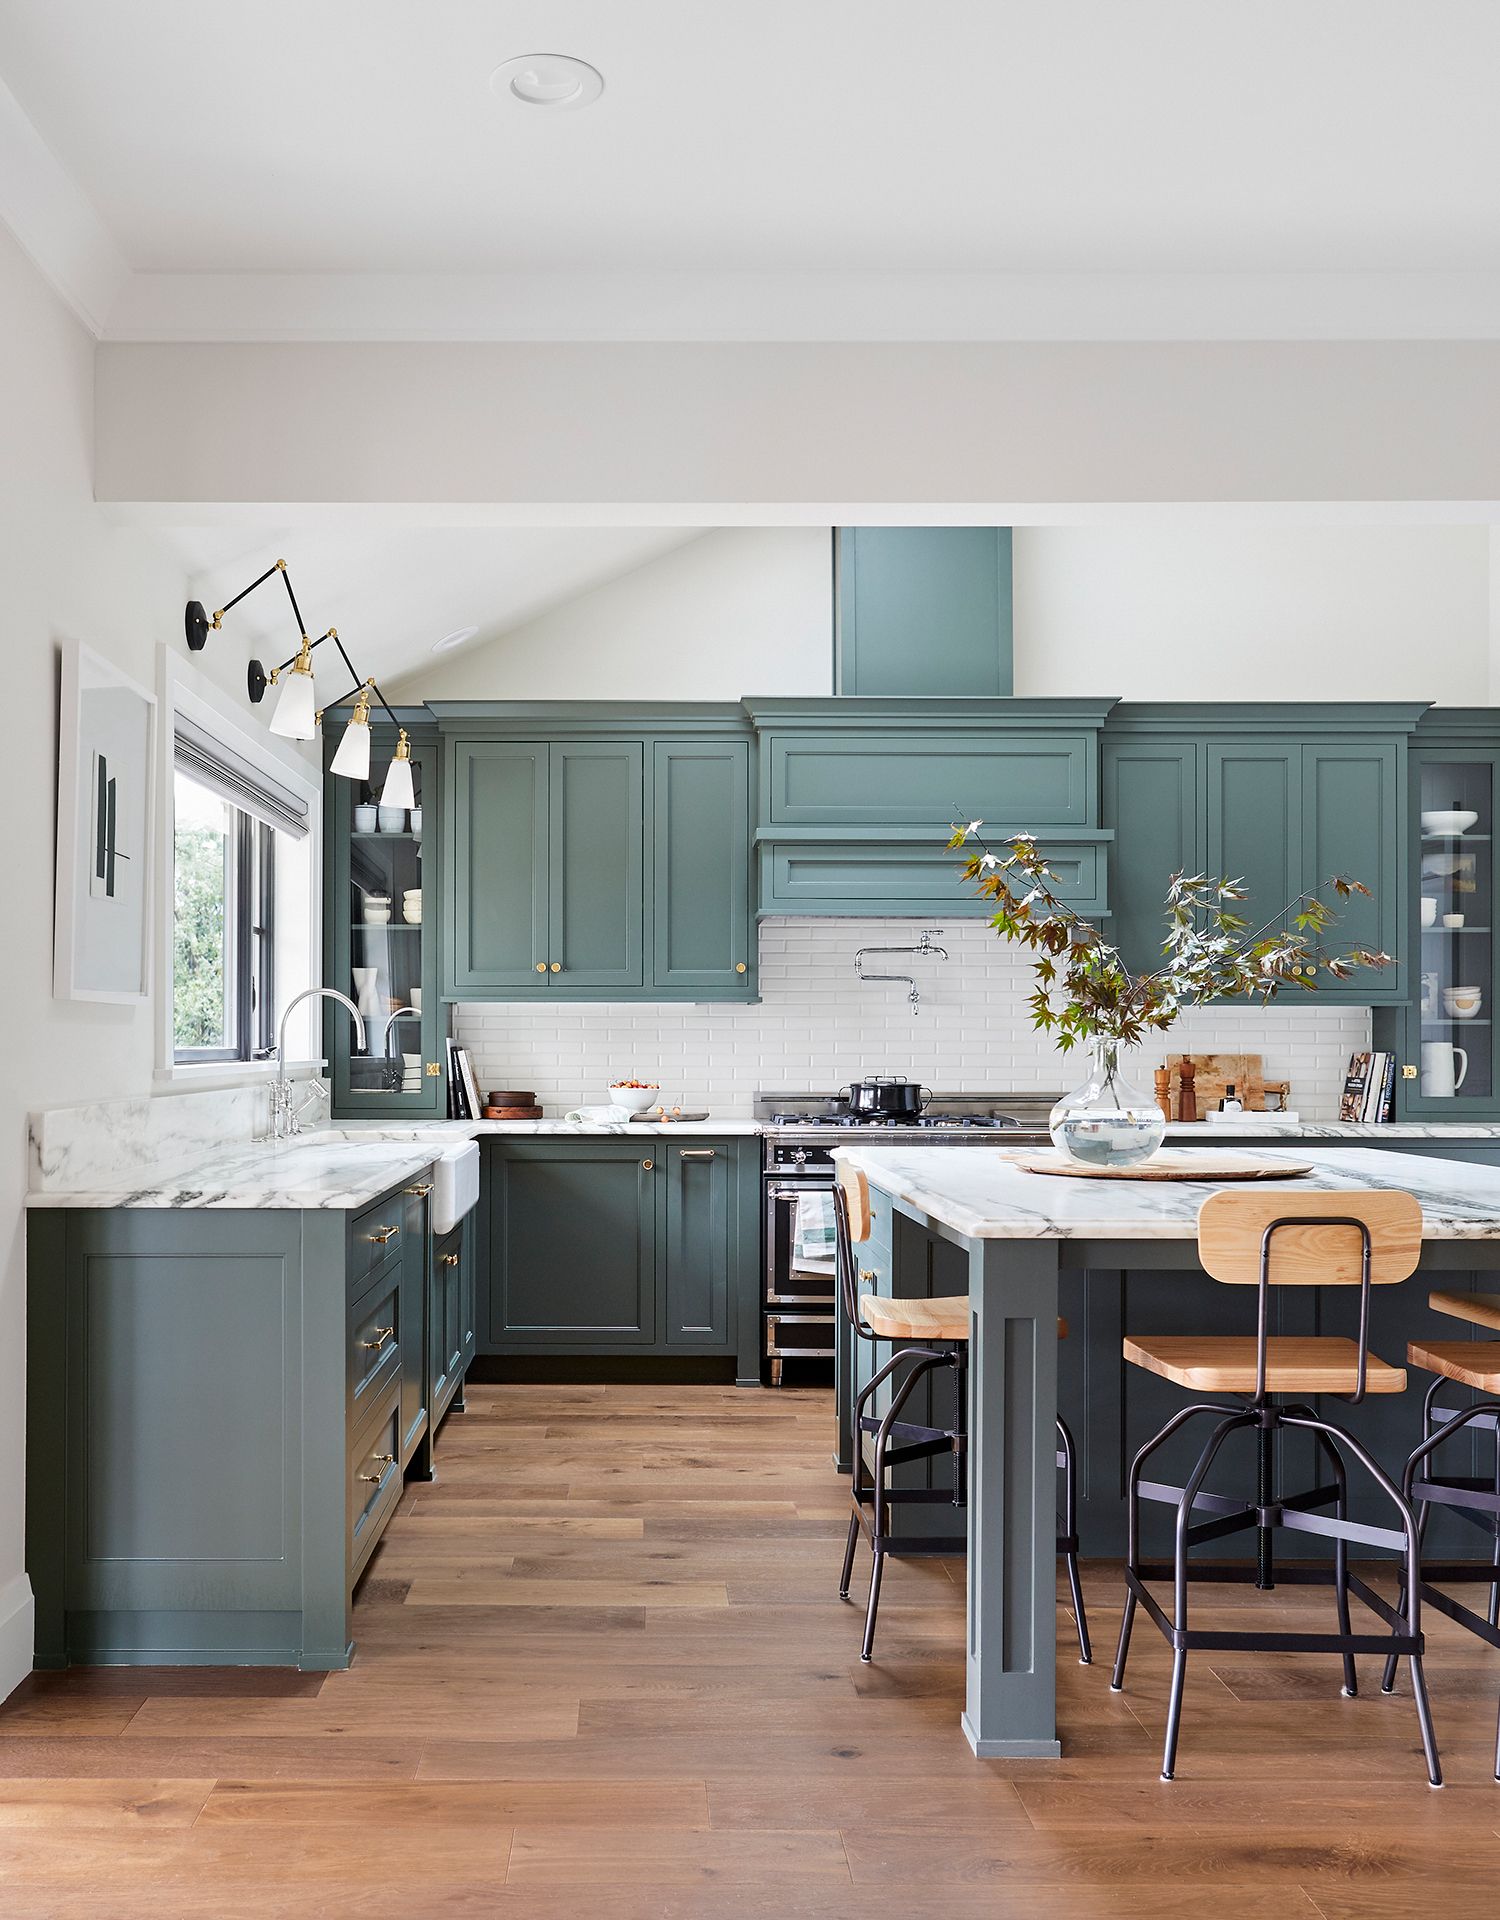 Kitchen Cabinet Paint Colors For 2020 Stylish Kitchen Cabinet Paint Colors Discover the latest design trends on italianbark in collaboraytion with bertazzoni. kitchen cabinet paint colors for 2020